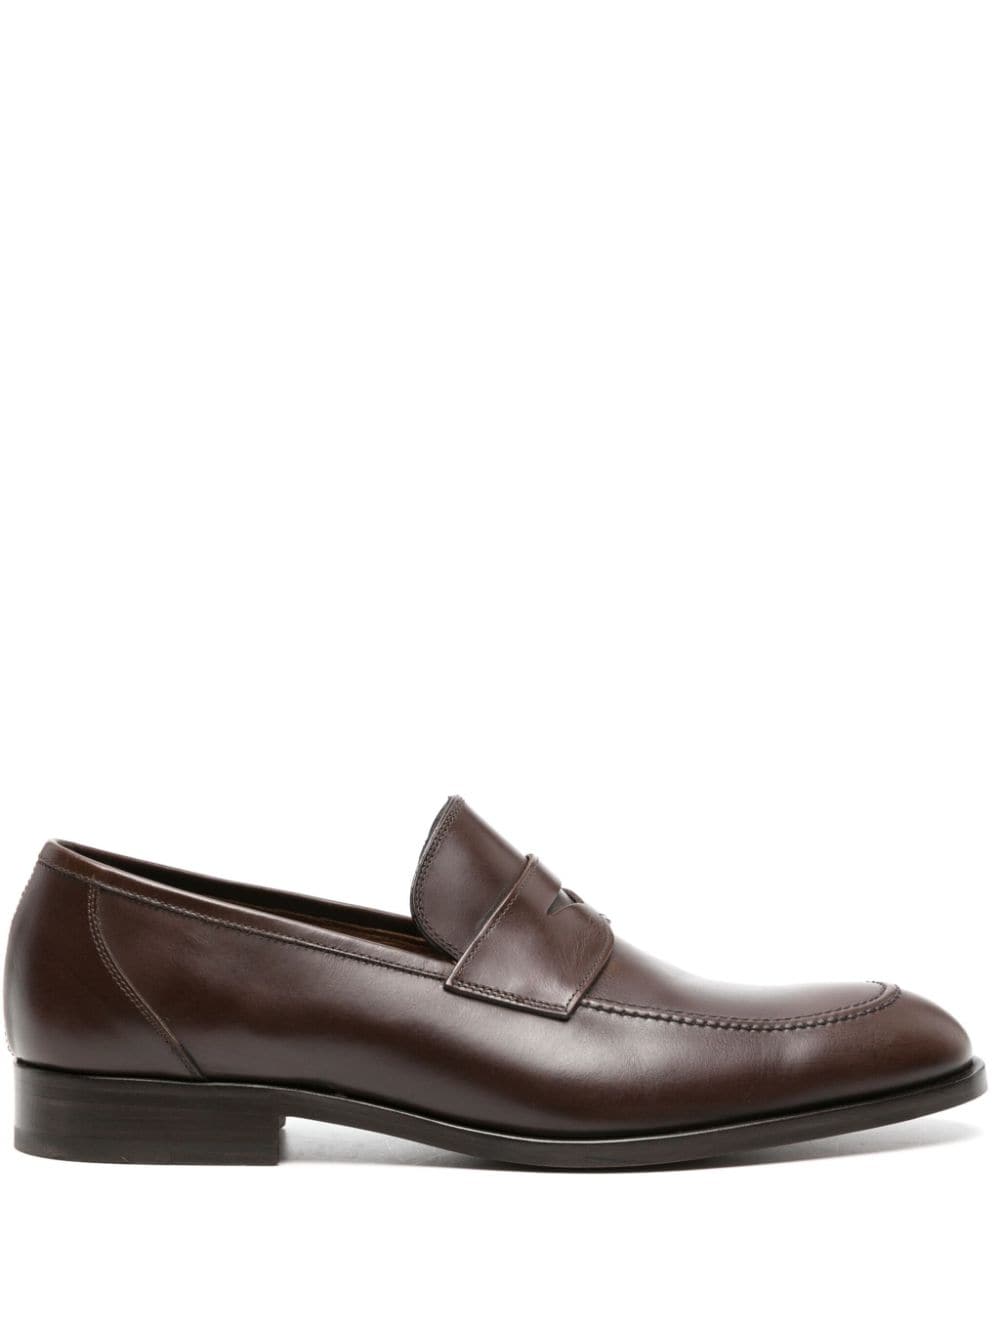 Image 1 of Fratelli Rossetti penny-slot polished leather loafers